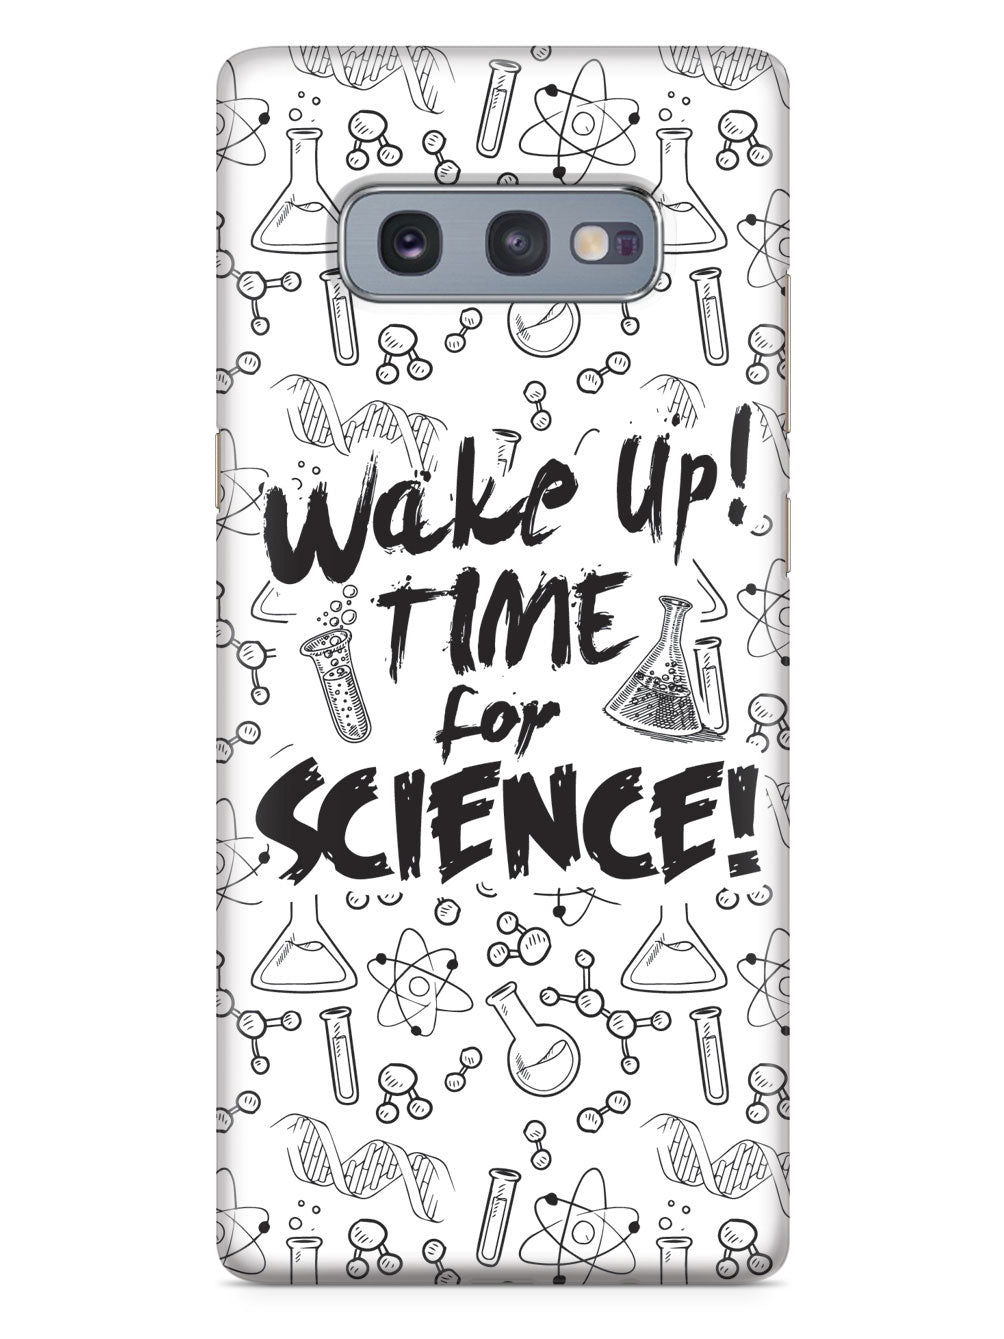 WAKE UP! Time For Science! - White Case